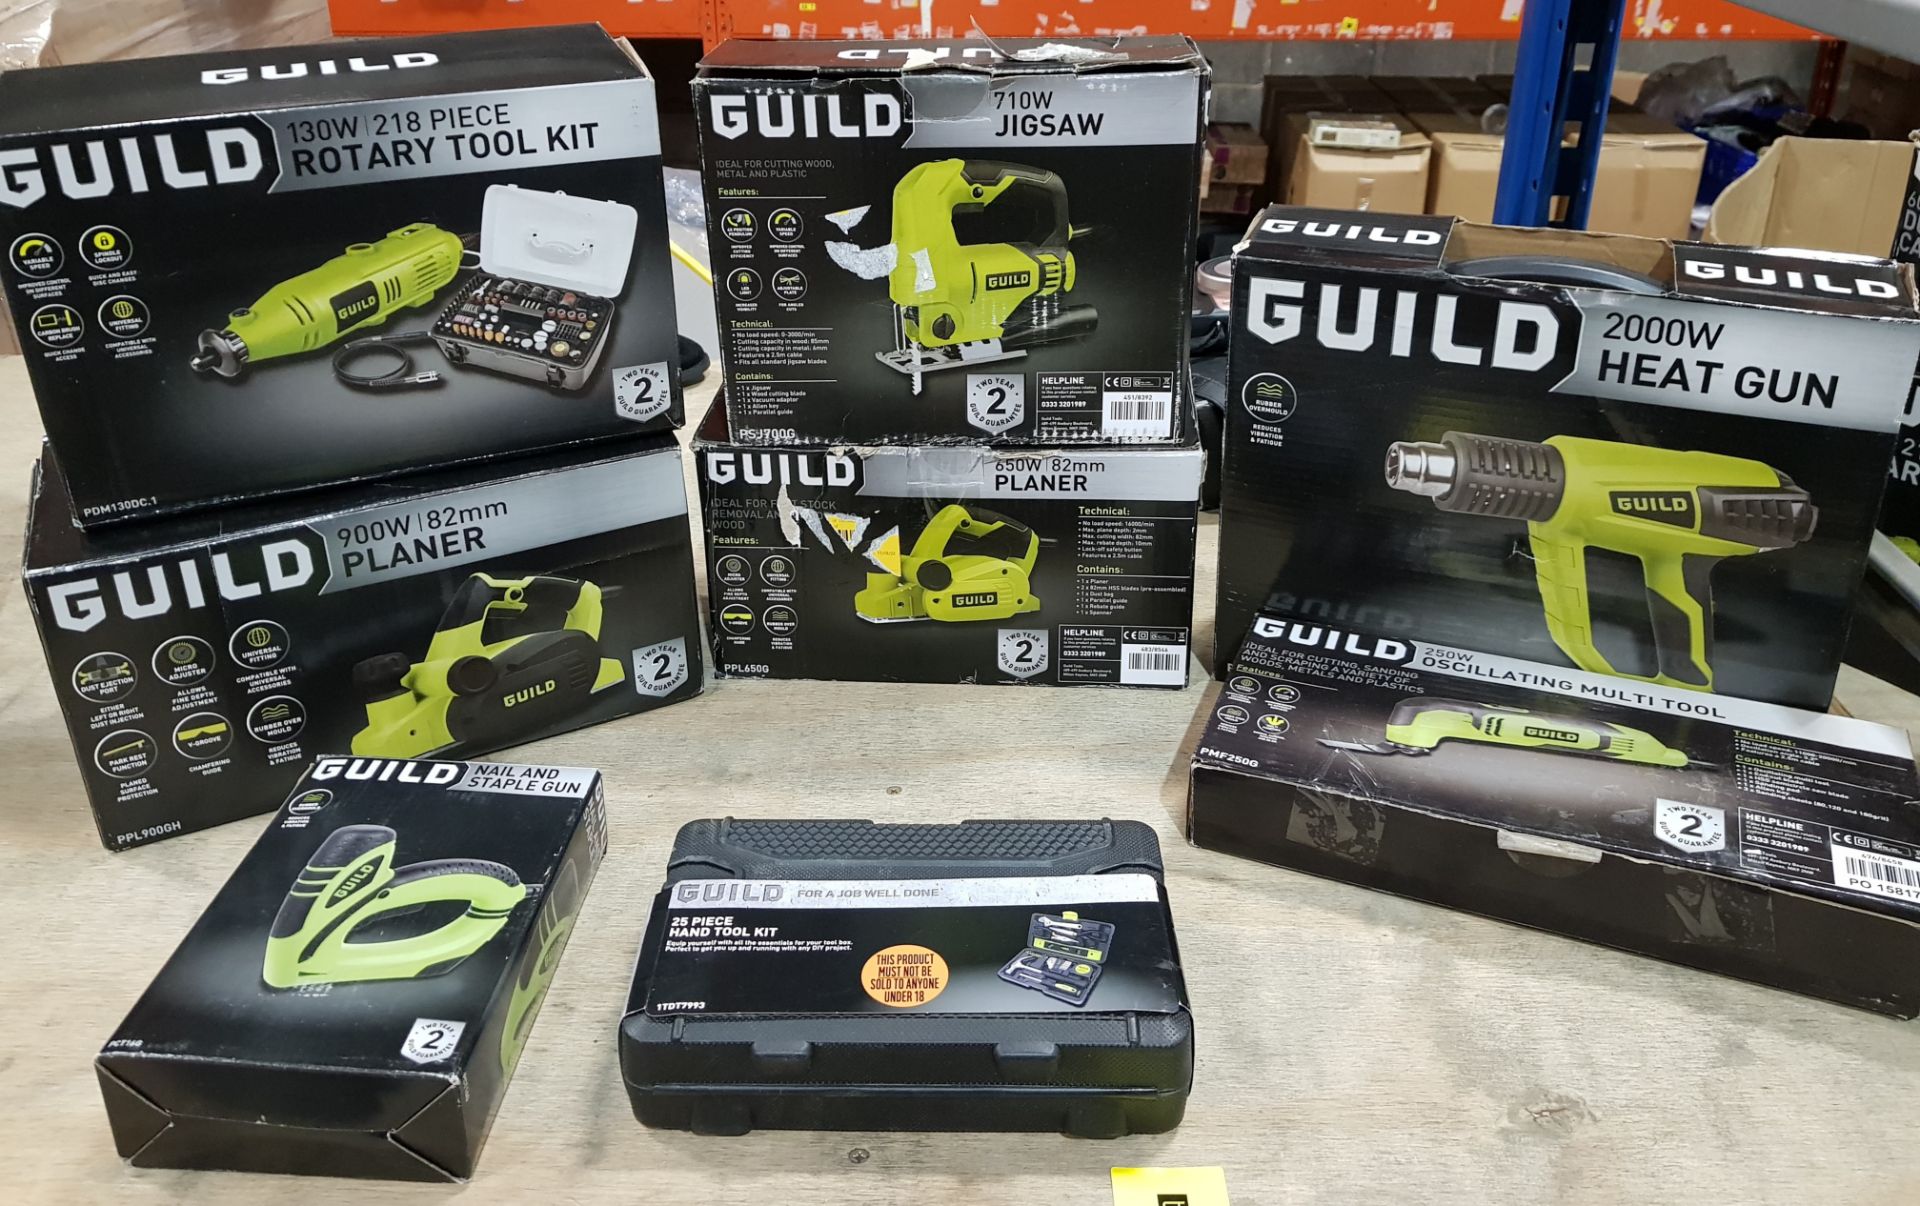 8 PIECE BRAND NEW MIXED GUILD TOOL LOT CONTAINING 1 X 130W 218 PIECE ROTARY TOOL KIT, 1 X 900W